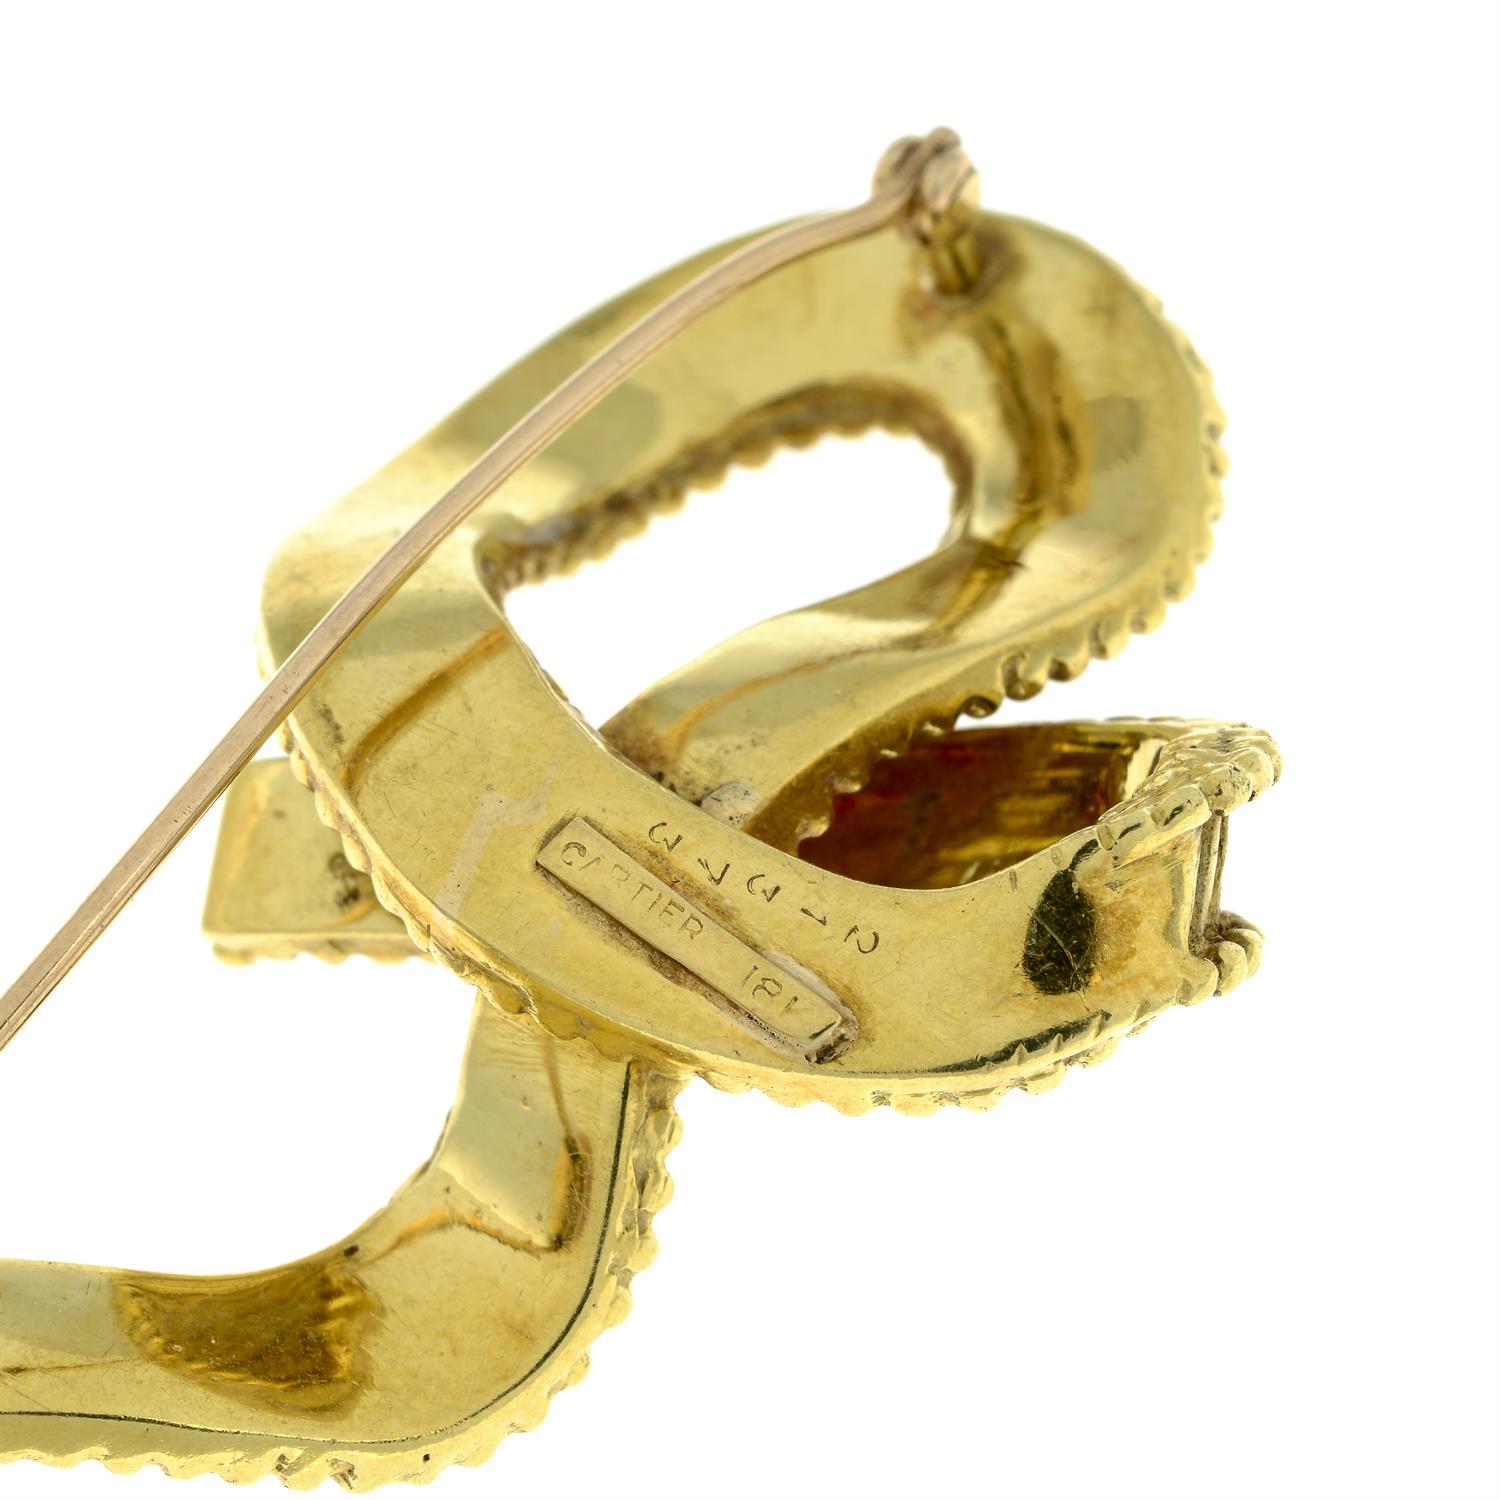 Mid 20th century 18ct gold brooch, by Cartier - Image 4 of 5